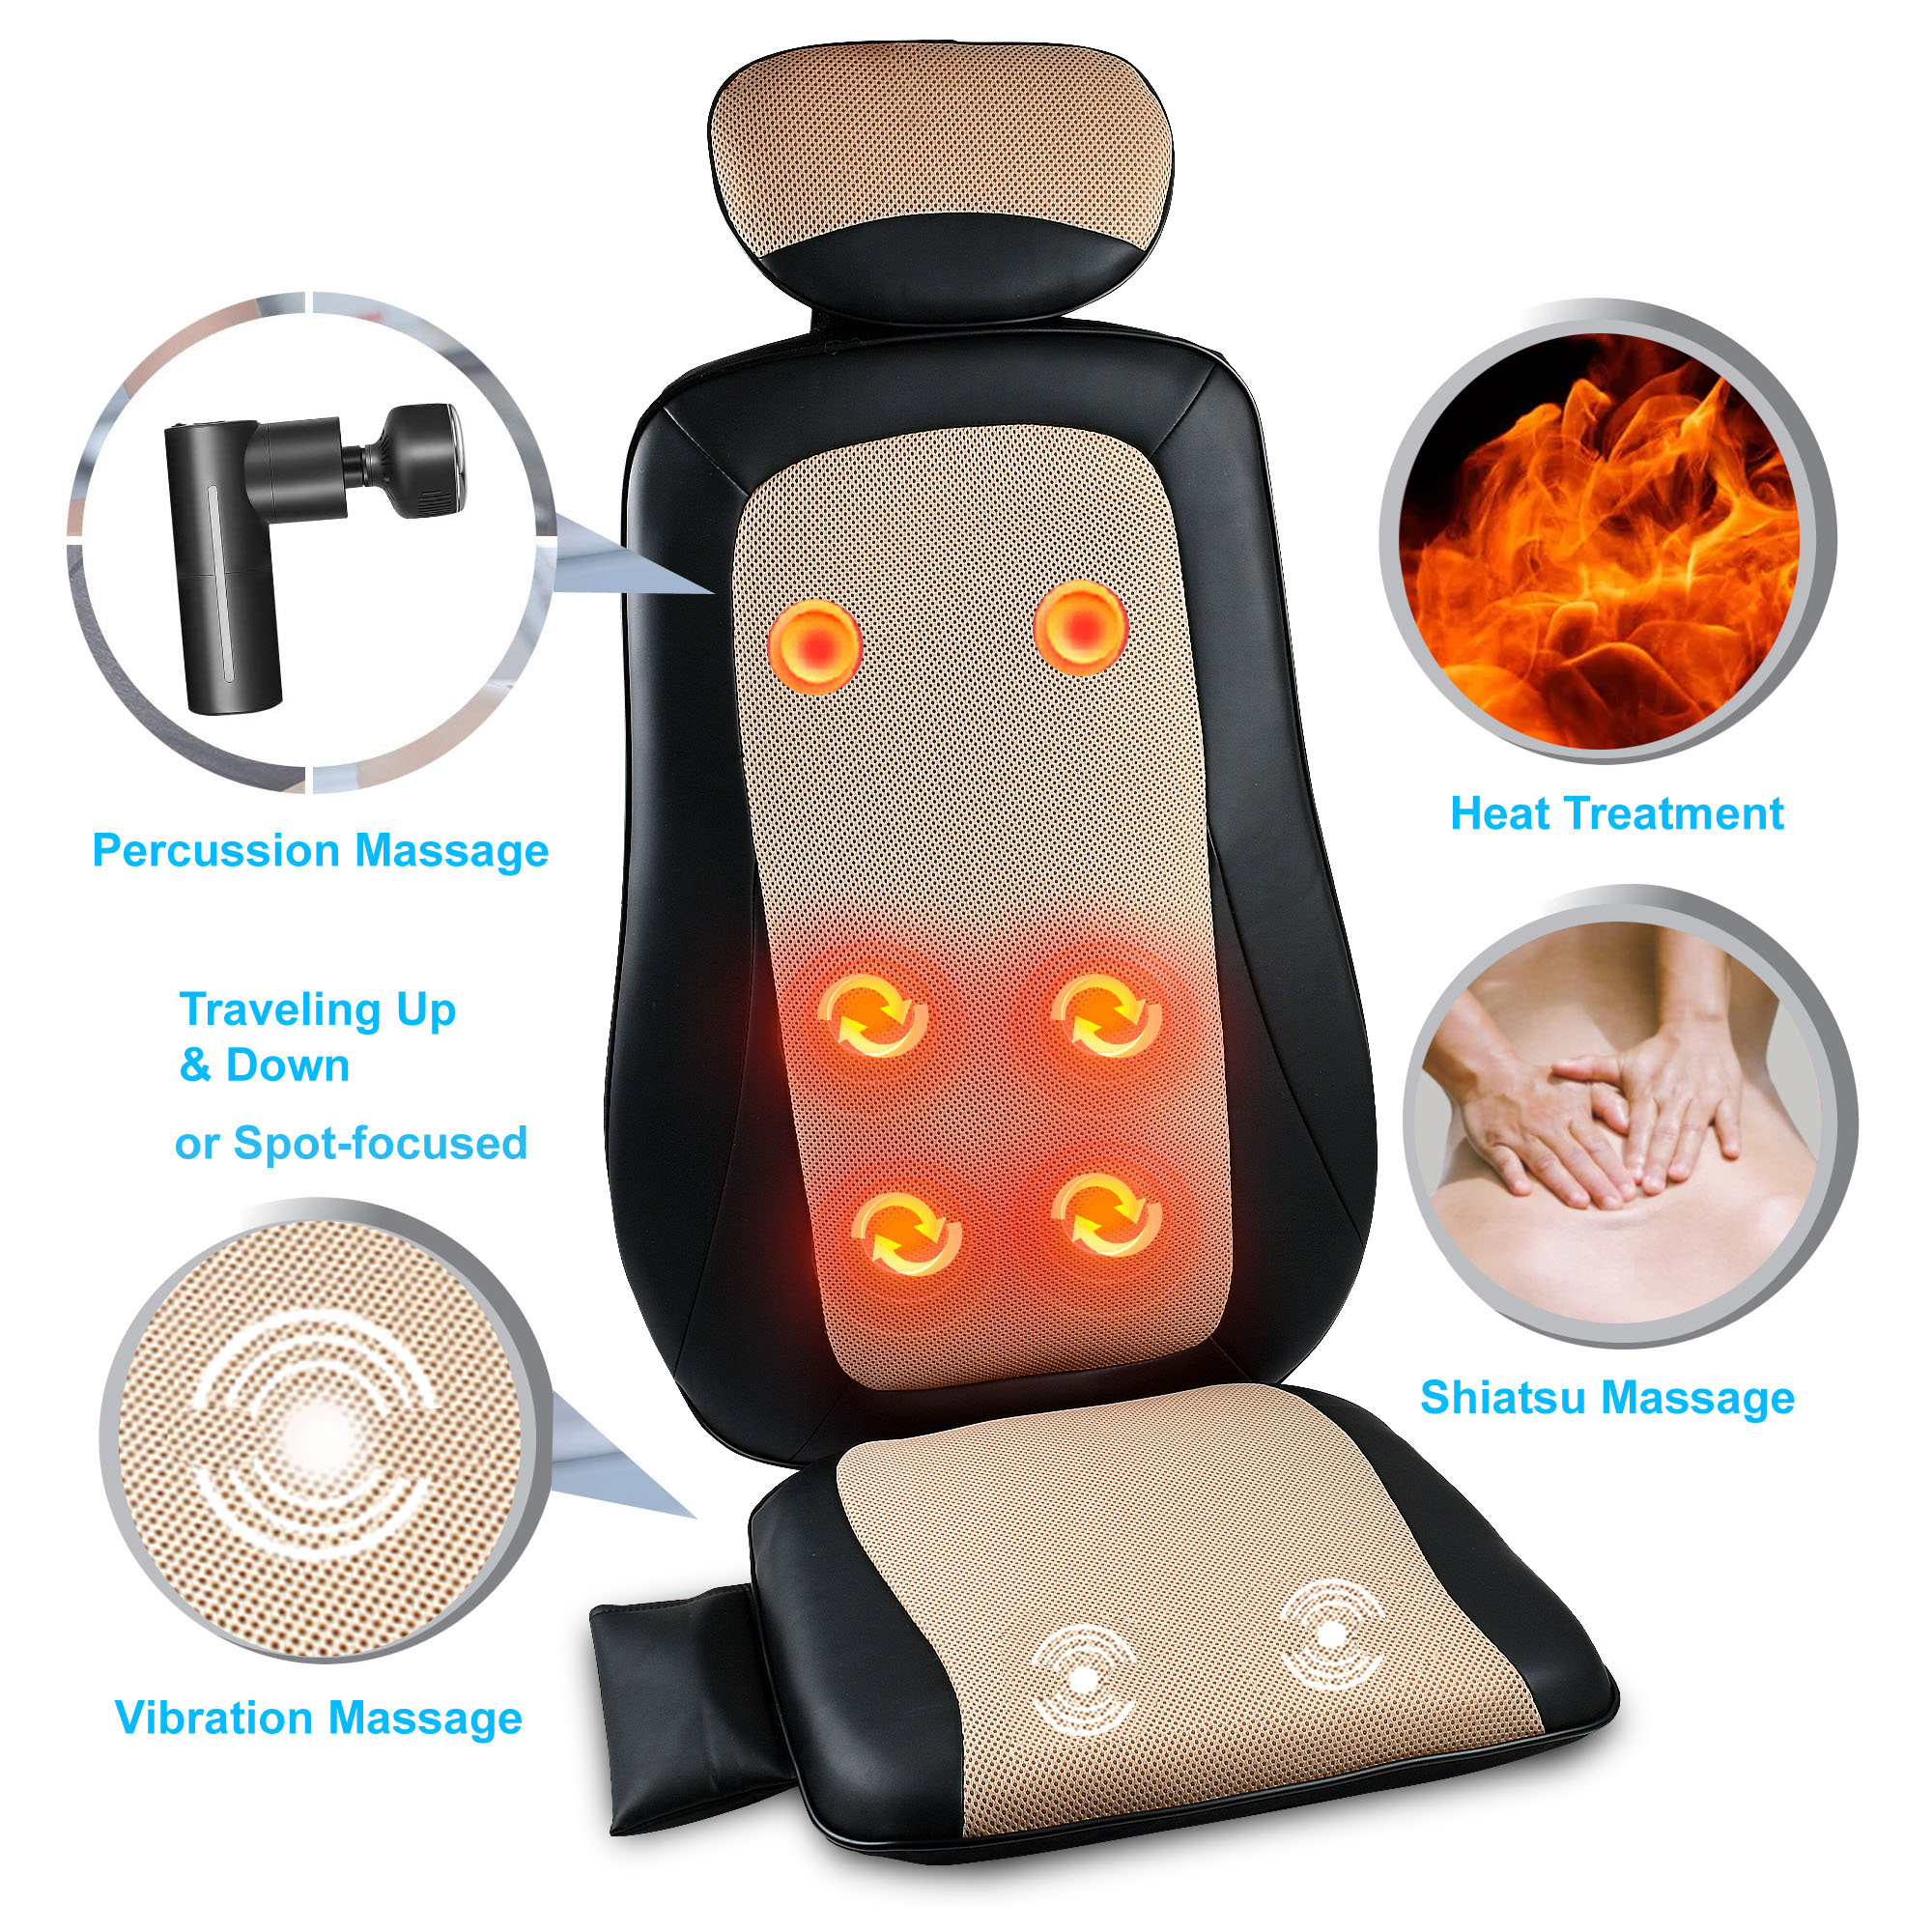 Shiatsu Plug-In Seat Pad with Heat Therapy - Black, Full Back Massage, Percussion, Vibration, Relieve Tension and Anxiety | - Carepeutic KH289